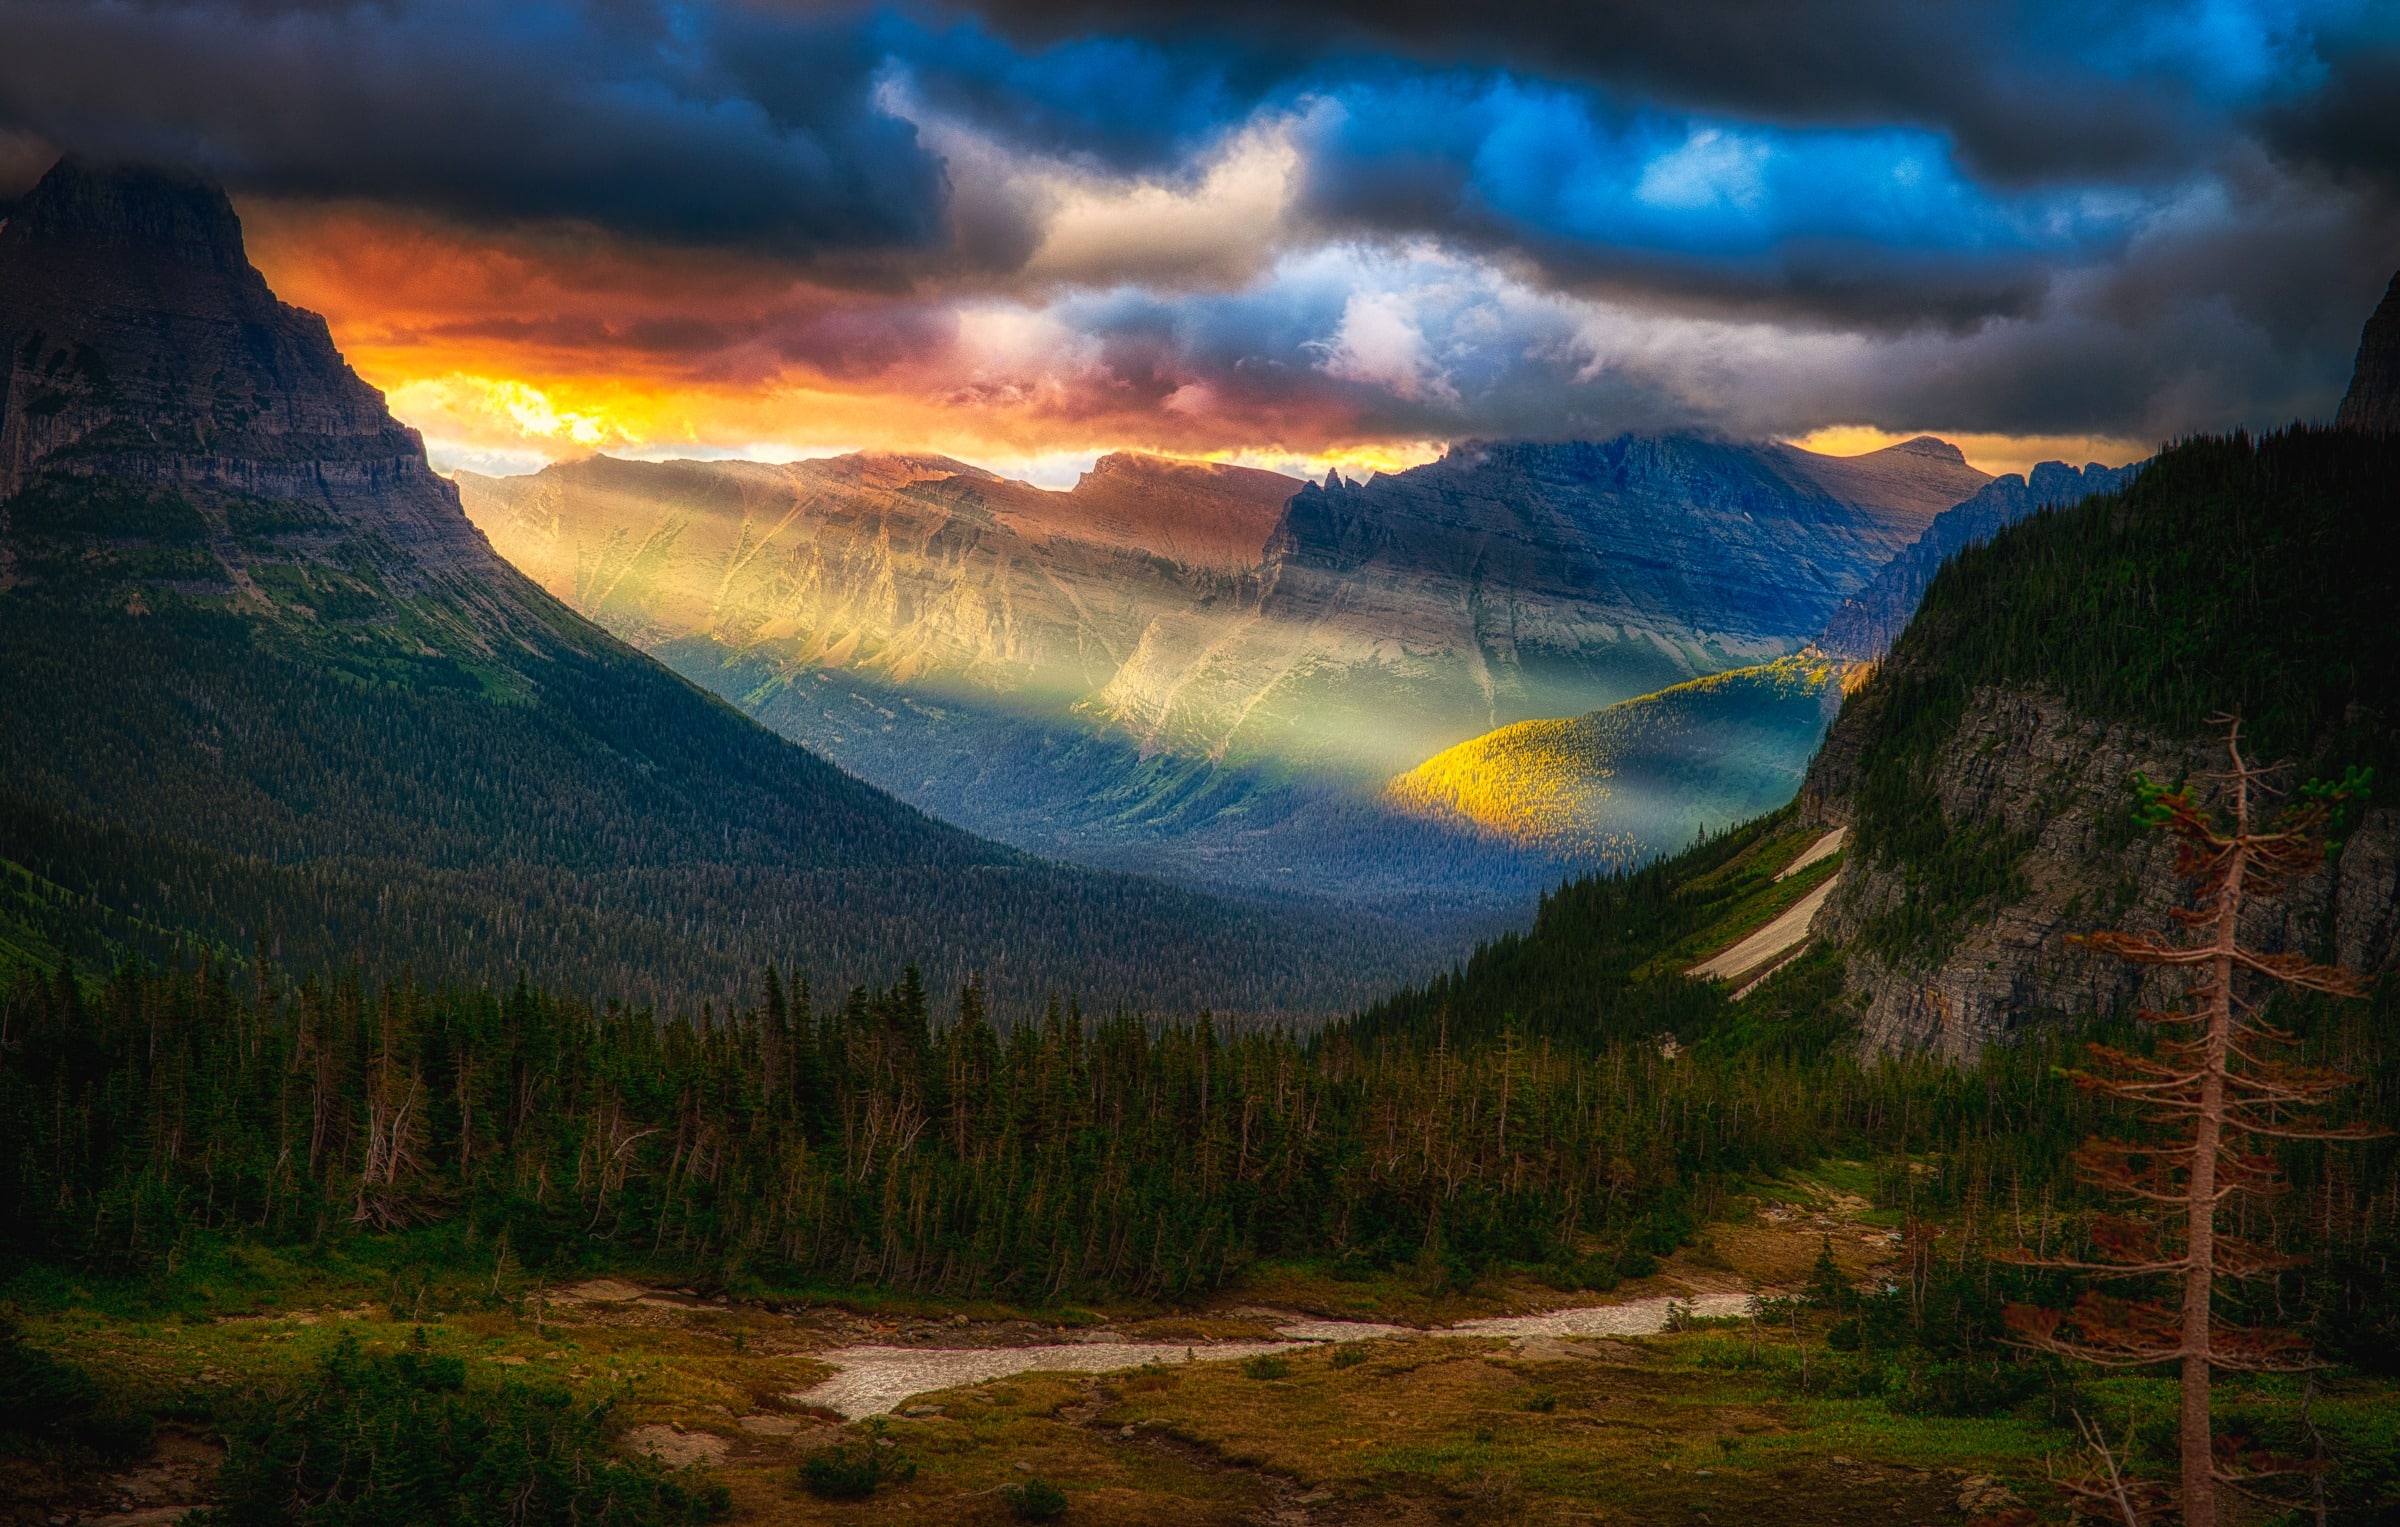 Crepuscular rays beam through the stormy dawn at Logan Pass on the Going-to-the-Sun Road in Glacier National Park, Montana.